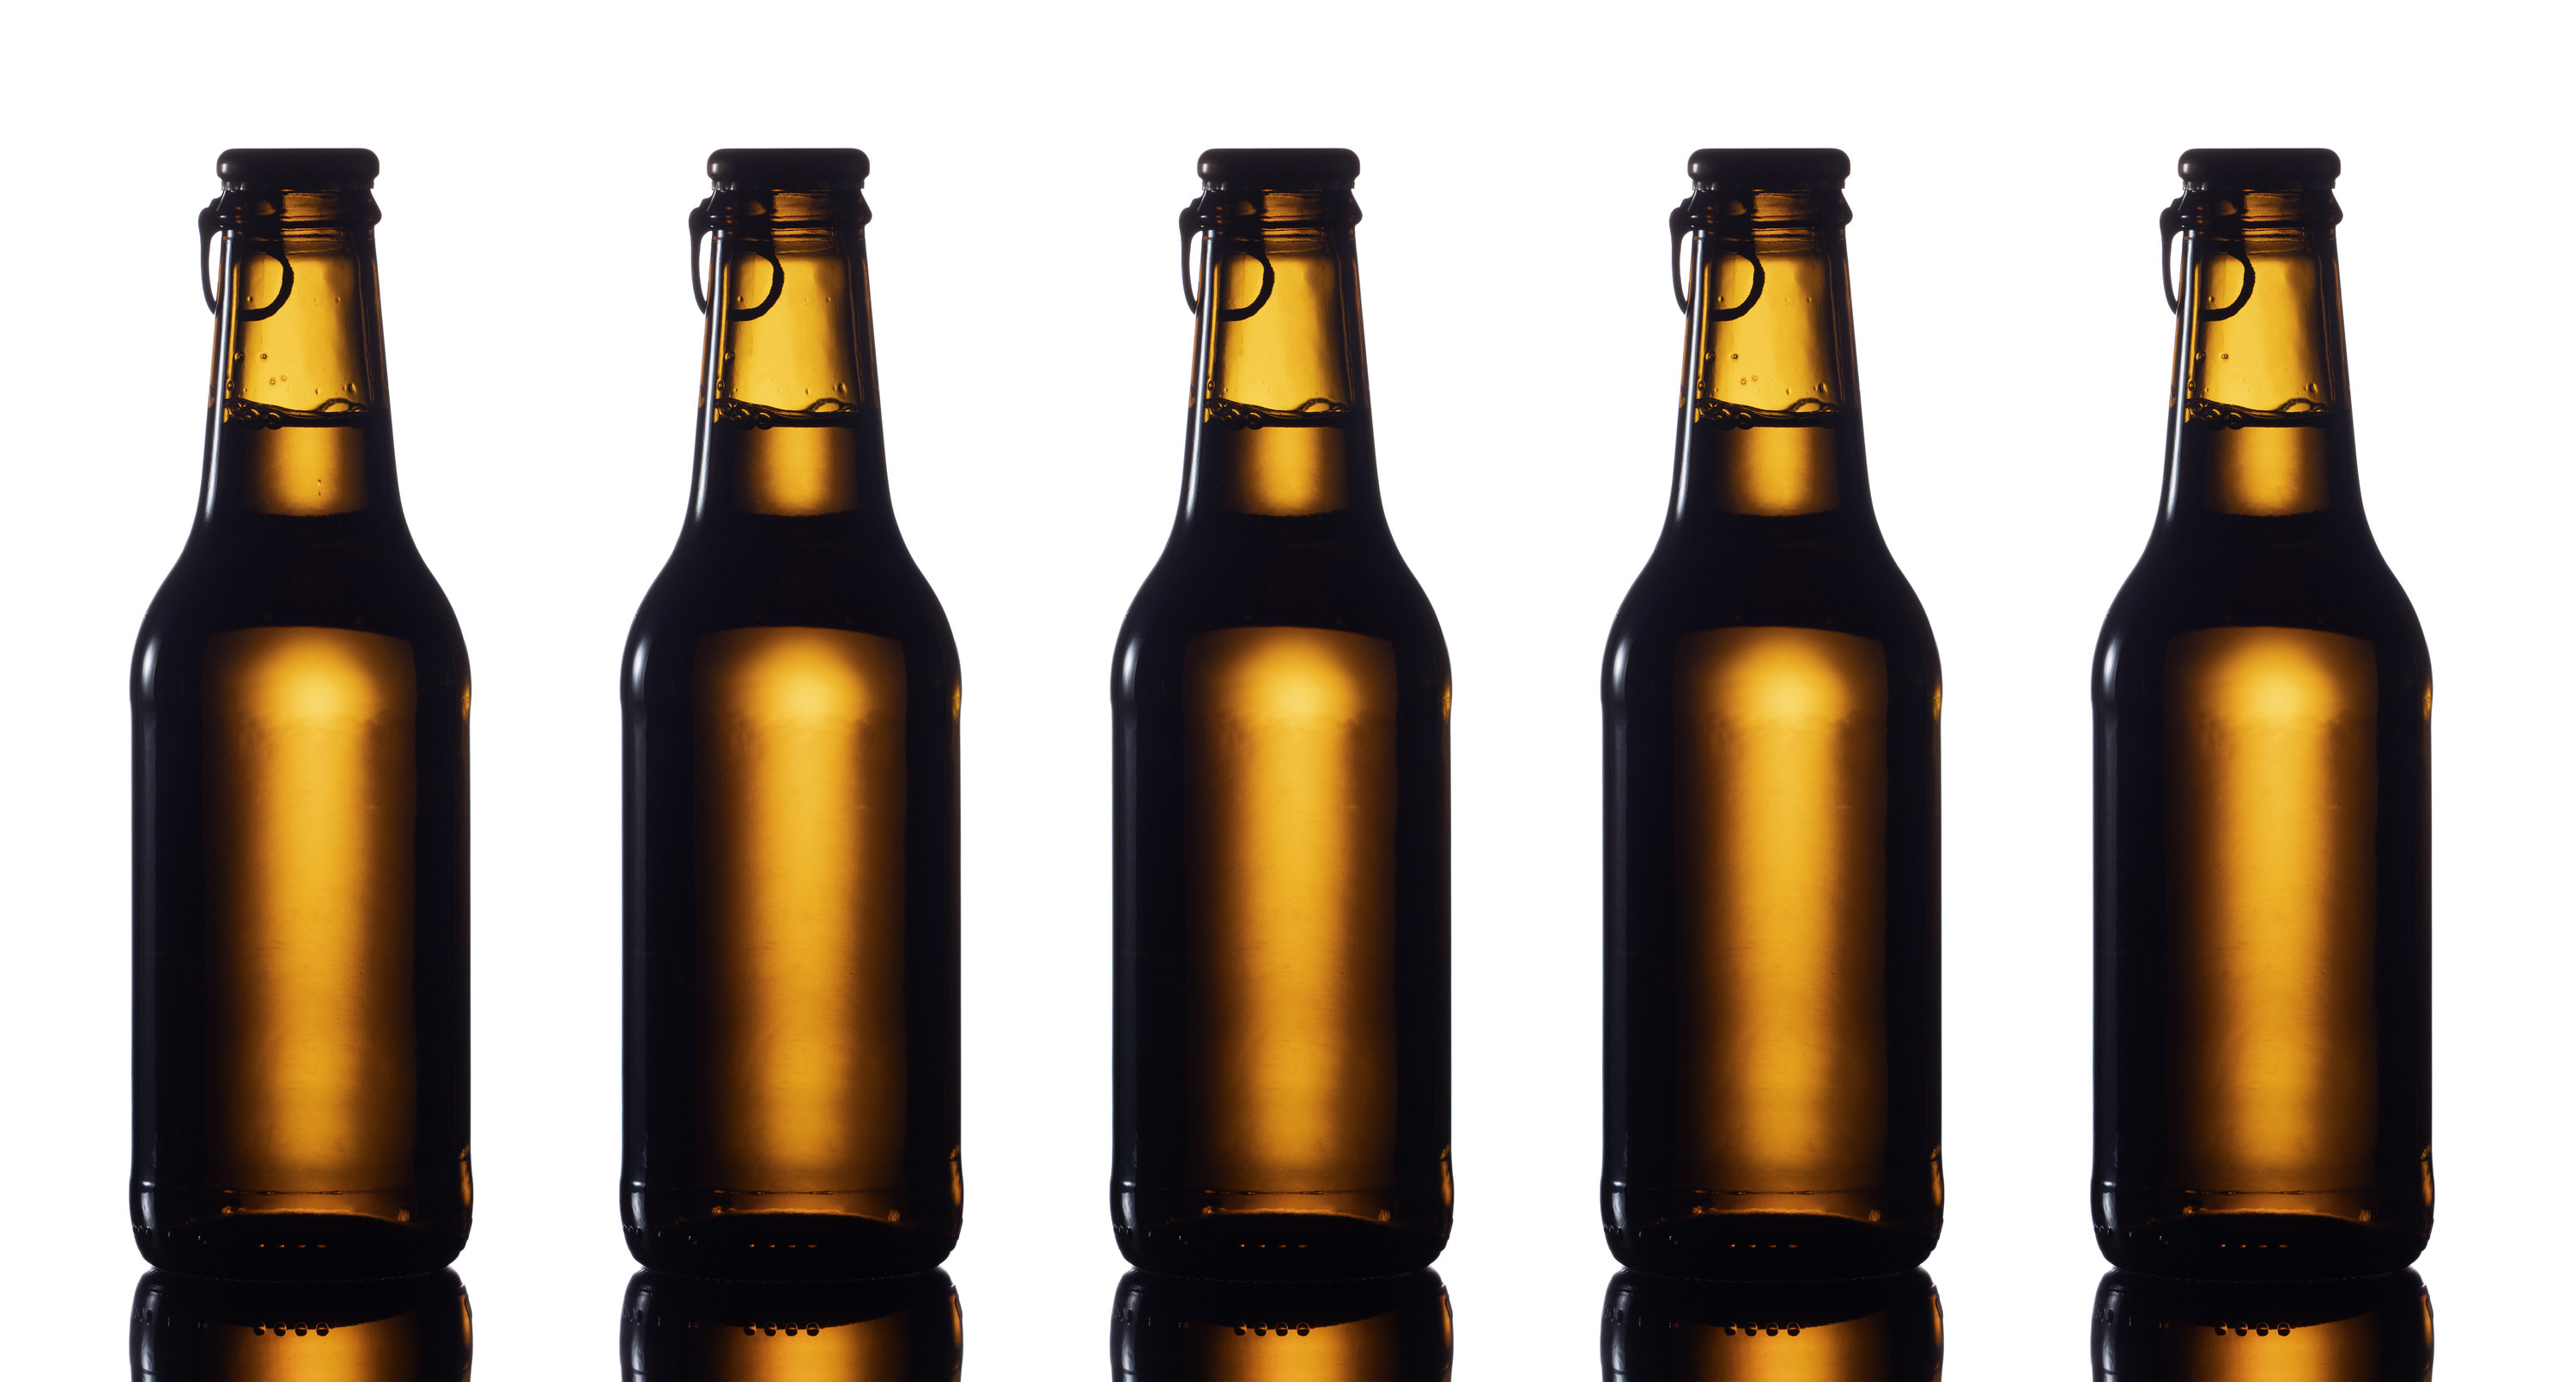 Five label-less beer bottles in a row